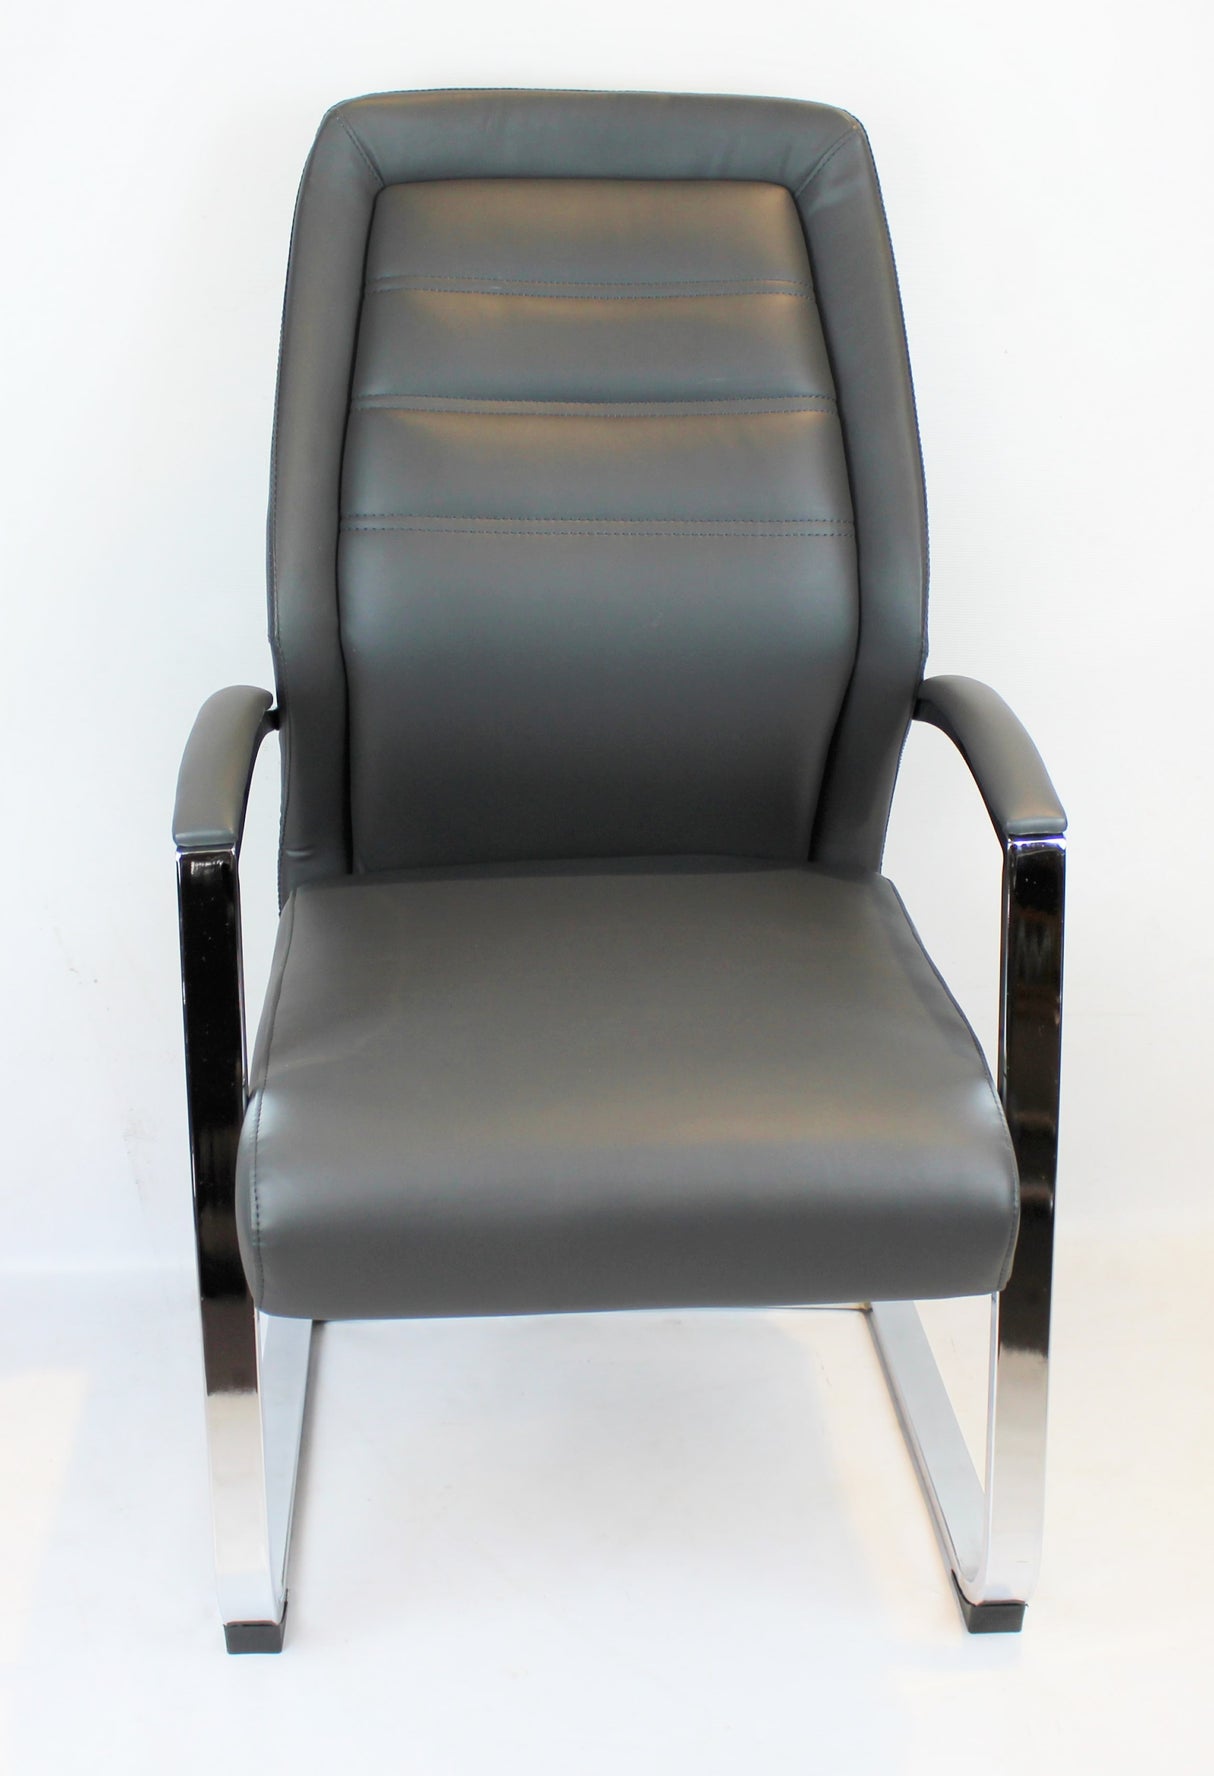 Modern Grey Leather Meeting Chairs - DH-103-2